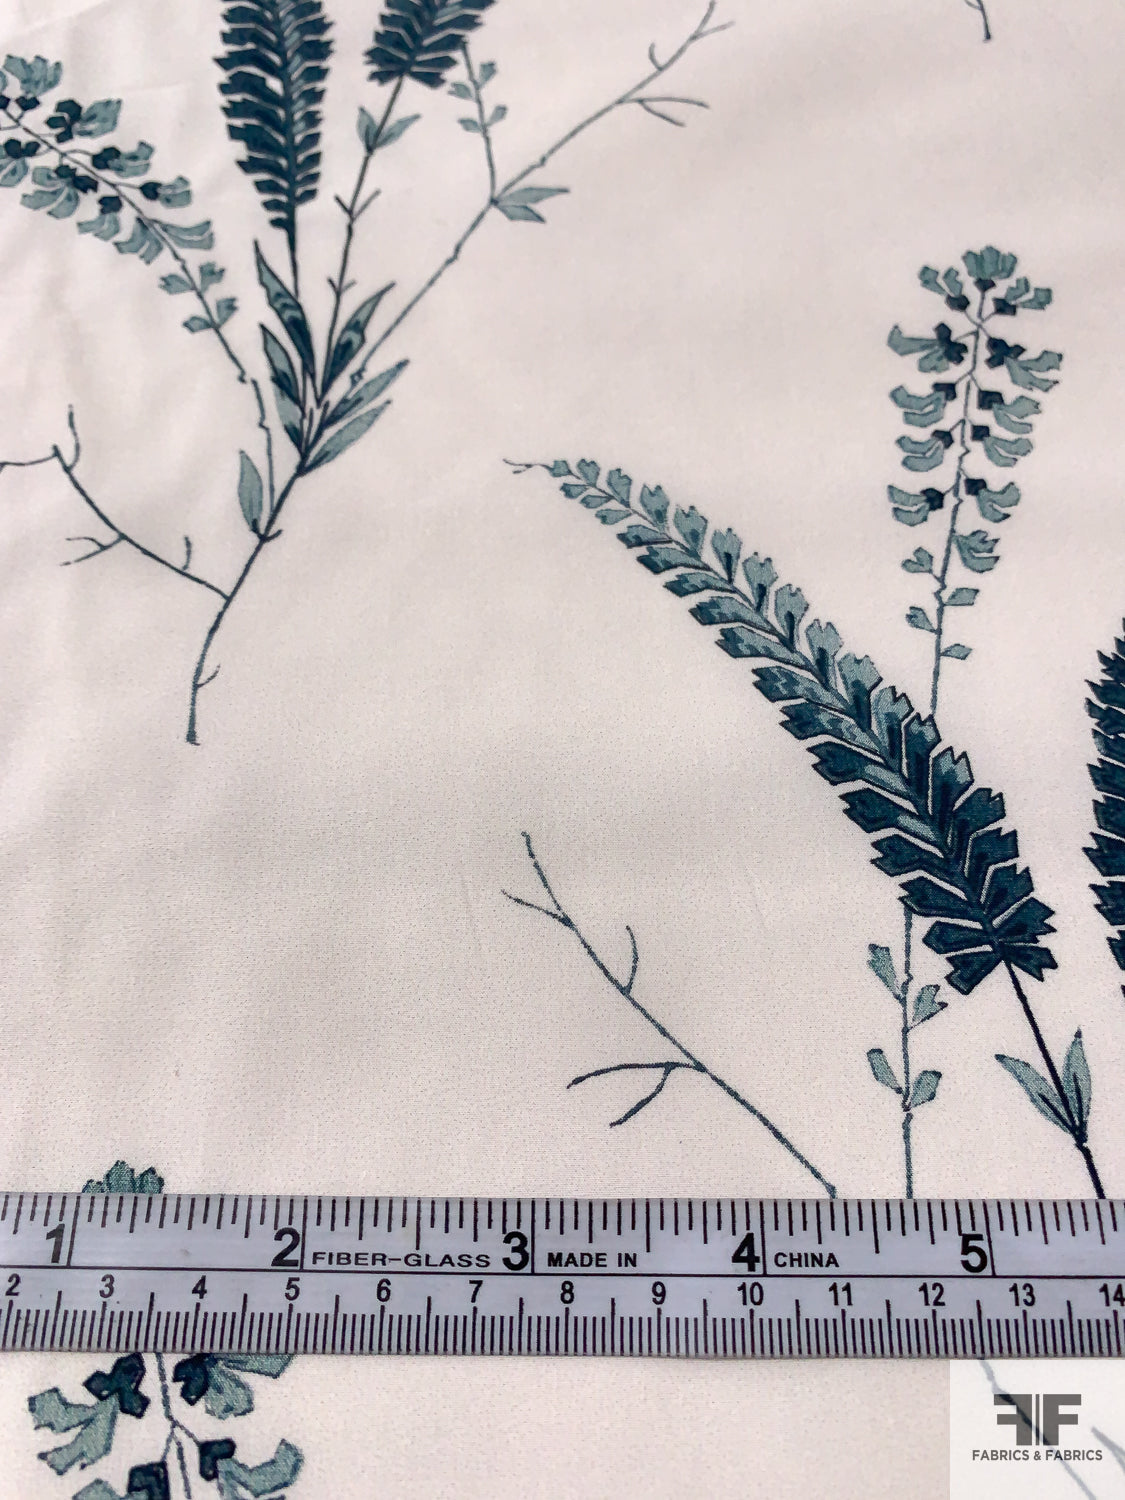 Leaf Stems Printed Cotton Poplin - Midnight Teal / Dusty Teal / Off-White